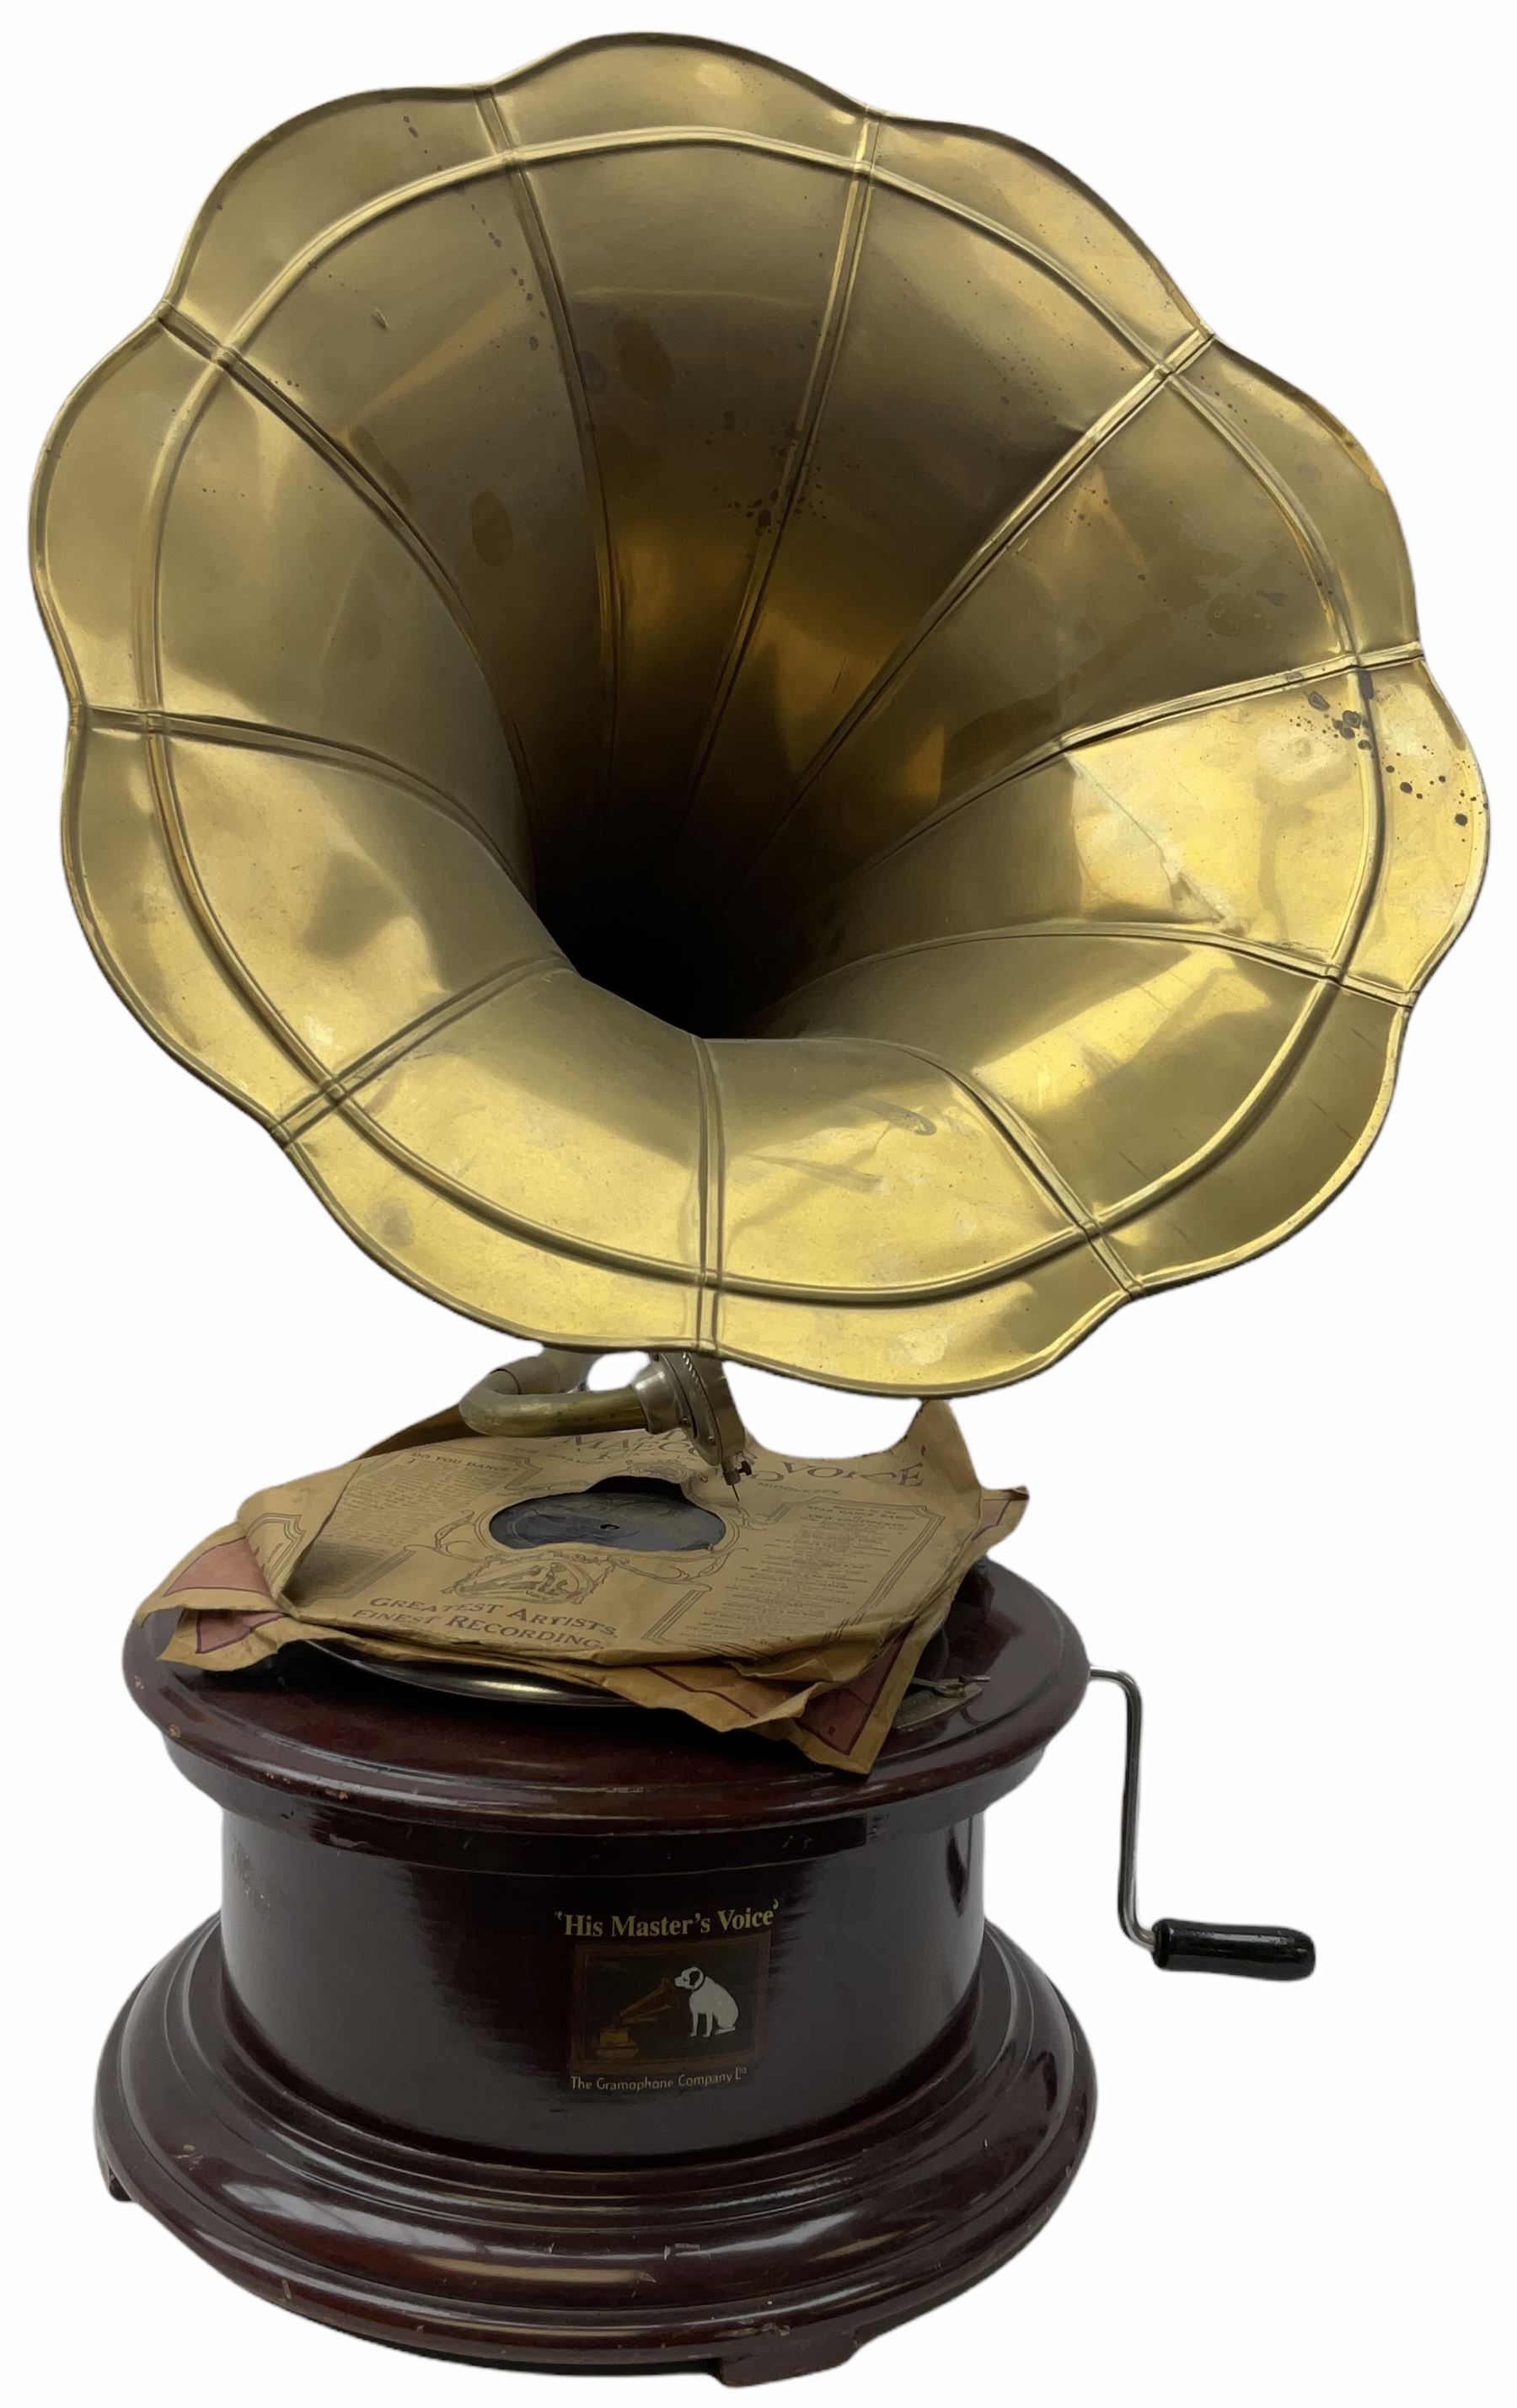 His Master's Voice table top wind up gramophone on a circular wooden base - Image 4 of 8